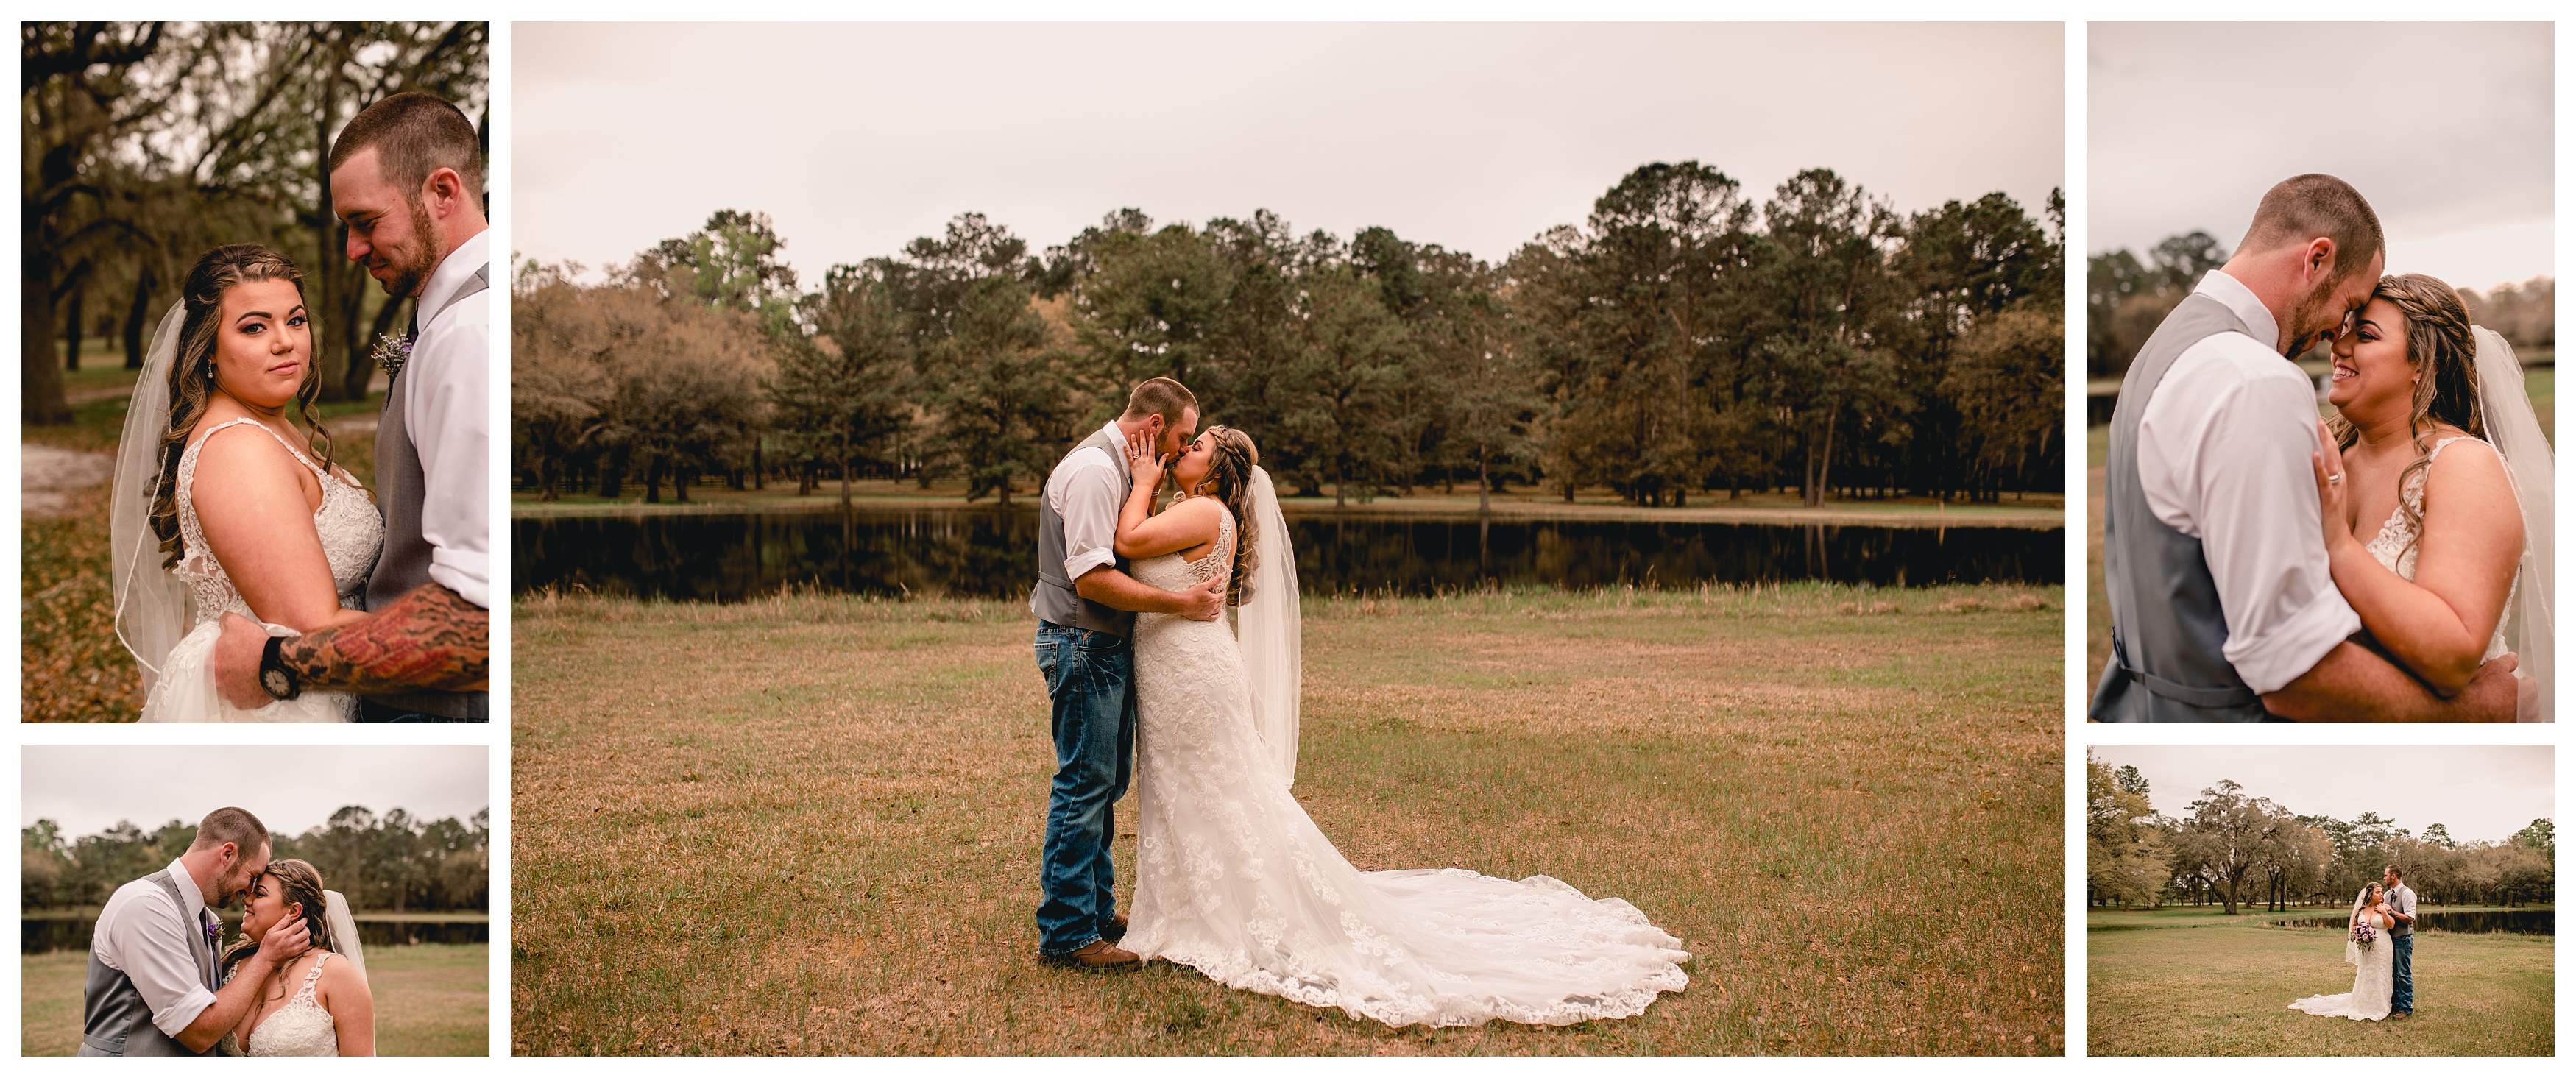 Bridal pictures that are intimate and emotional by Tallahassee wedding photographer. Shelly Williams Photography